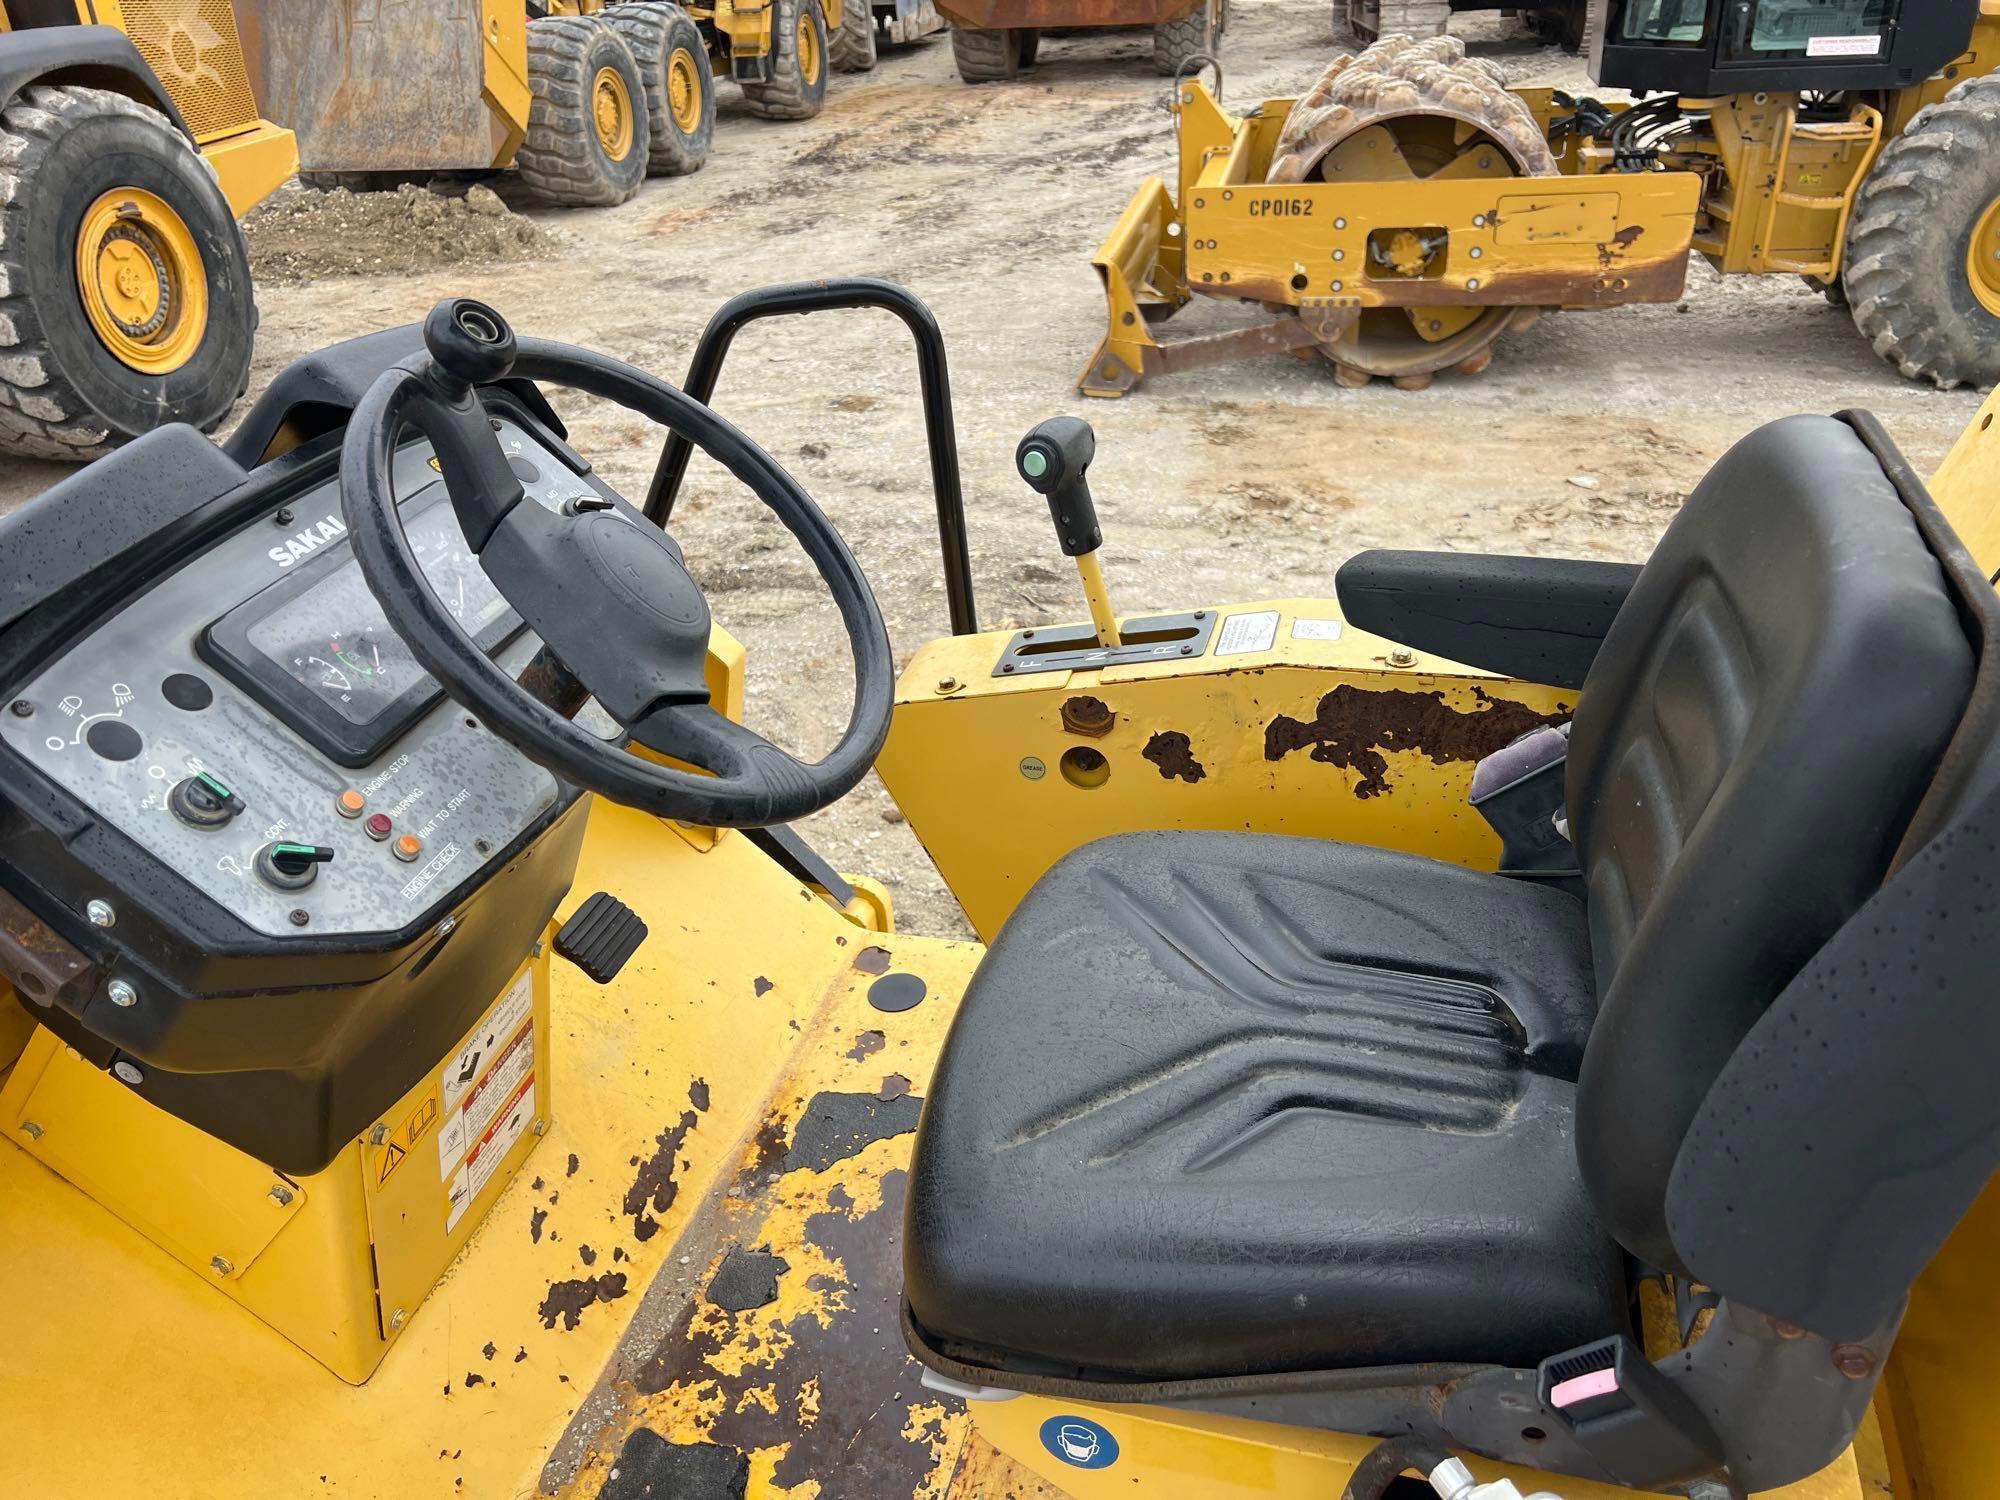 2014 SAKAI SV540T VIBRATORY ROLLER SN:10289 powered by Cummins diesel engine, equipped with OROPS,